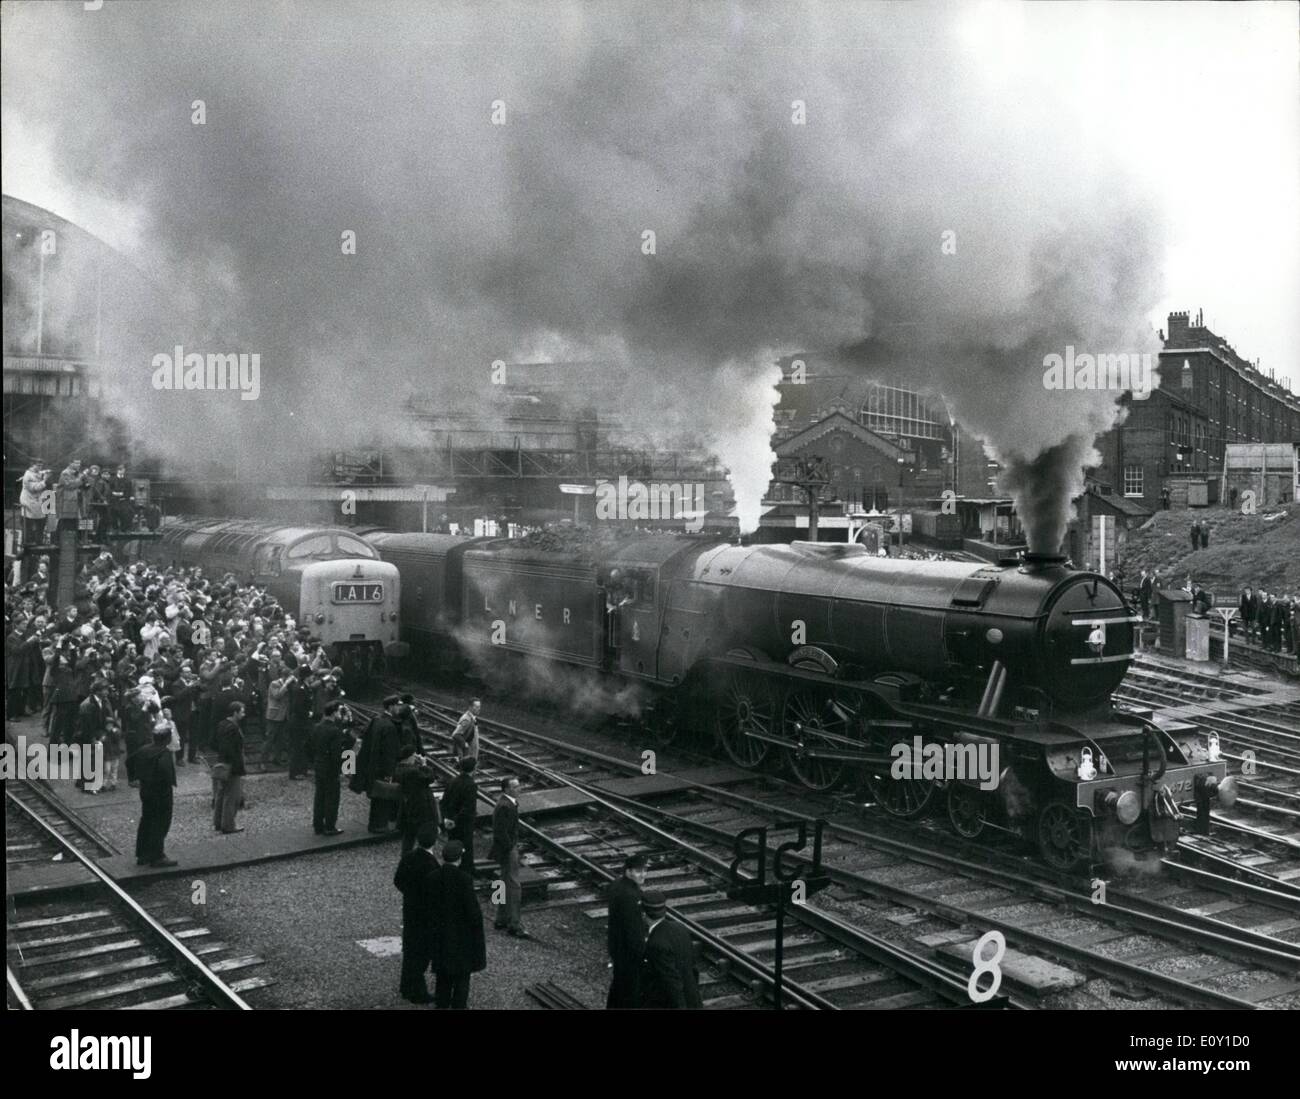 May 05, 1968 - The Flying Scotsman On Run To Edinburgh On Anniversary Of First Run: The Flying Scotsman steam Locomotive, left King's Cross Station this morning on a non-stop run to Edinburgh - on the 40th. anniversary of its first trip. The famous stem locomotive was bought by Mr. Alan Pegler, a Lloyds underwriter, for ,000 in 1963 when it was retired by British Rail after 2,076,000 miles of service. Since then Mr Stock Photo